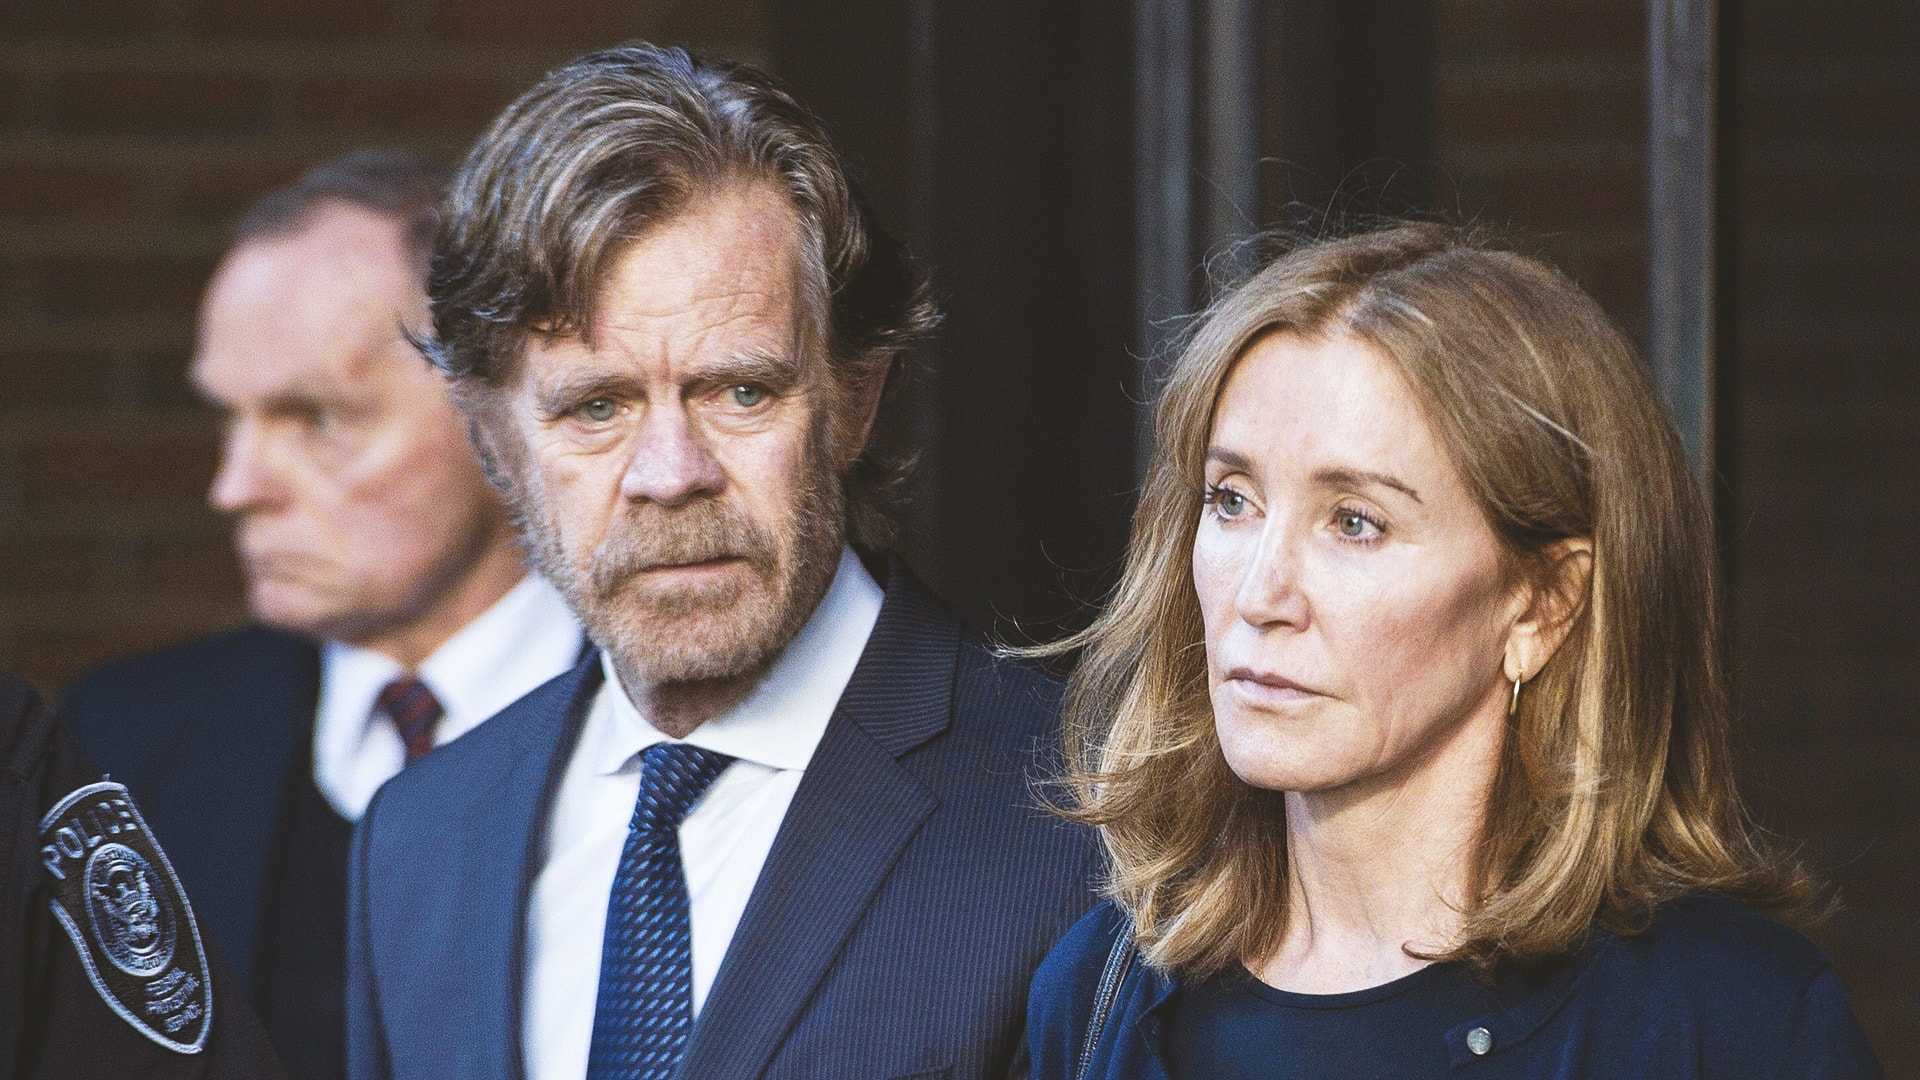 Felicity Huffman gets 14 days in prison in the college admissions scandal